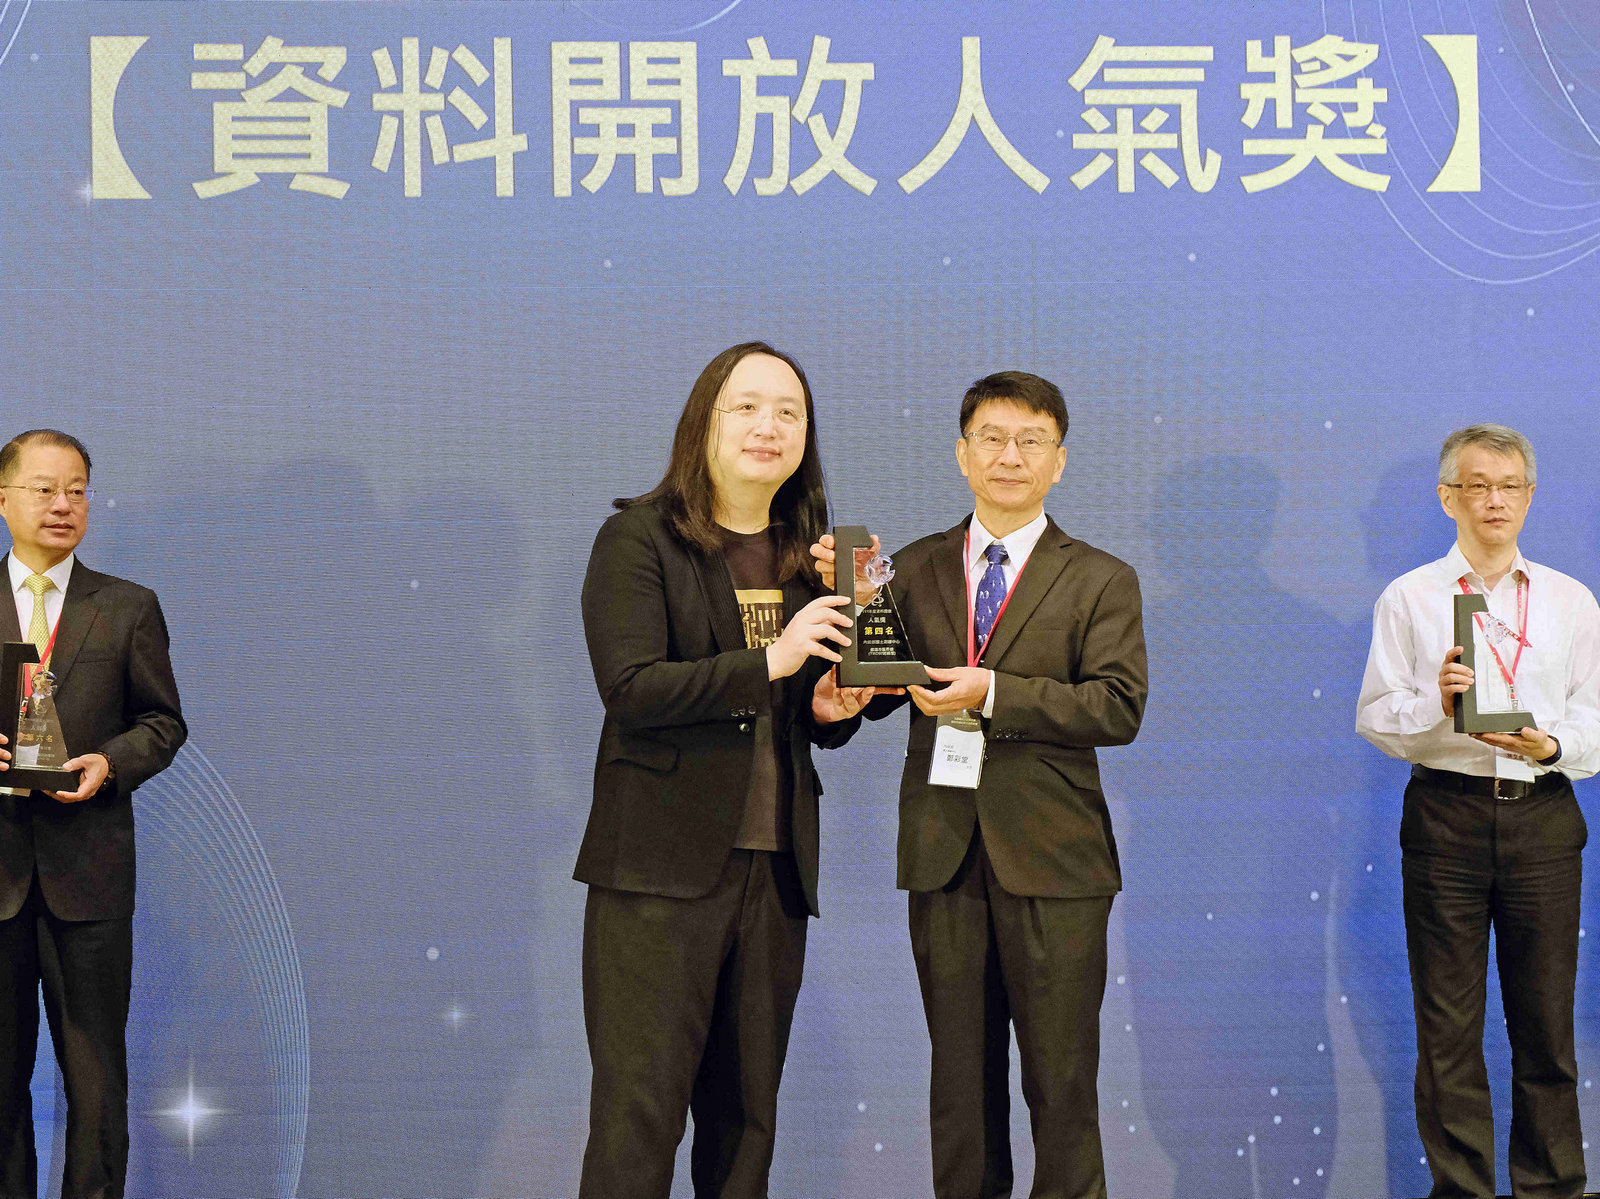 Tang Feng, Minister of Digital Affairs, awarded Cheng Tsai-Tang, the Director of NLSC  “the 4th place in Open Data Popularity Award in 2022”